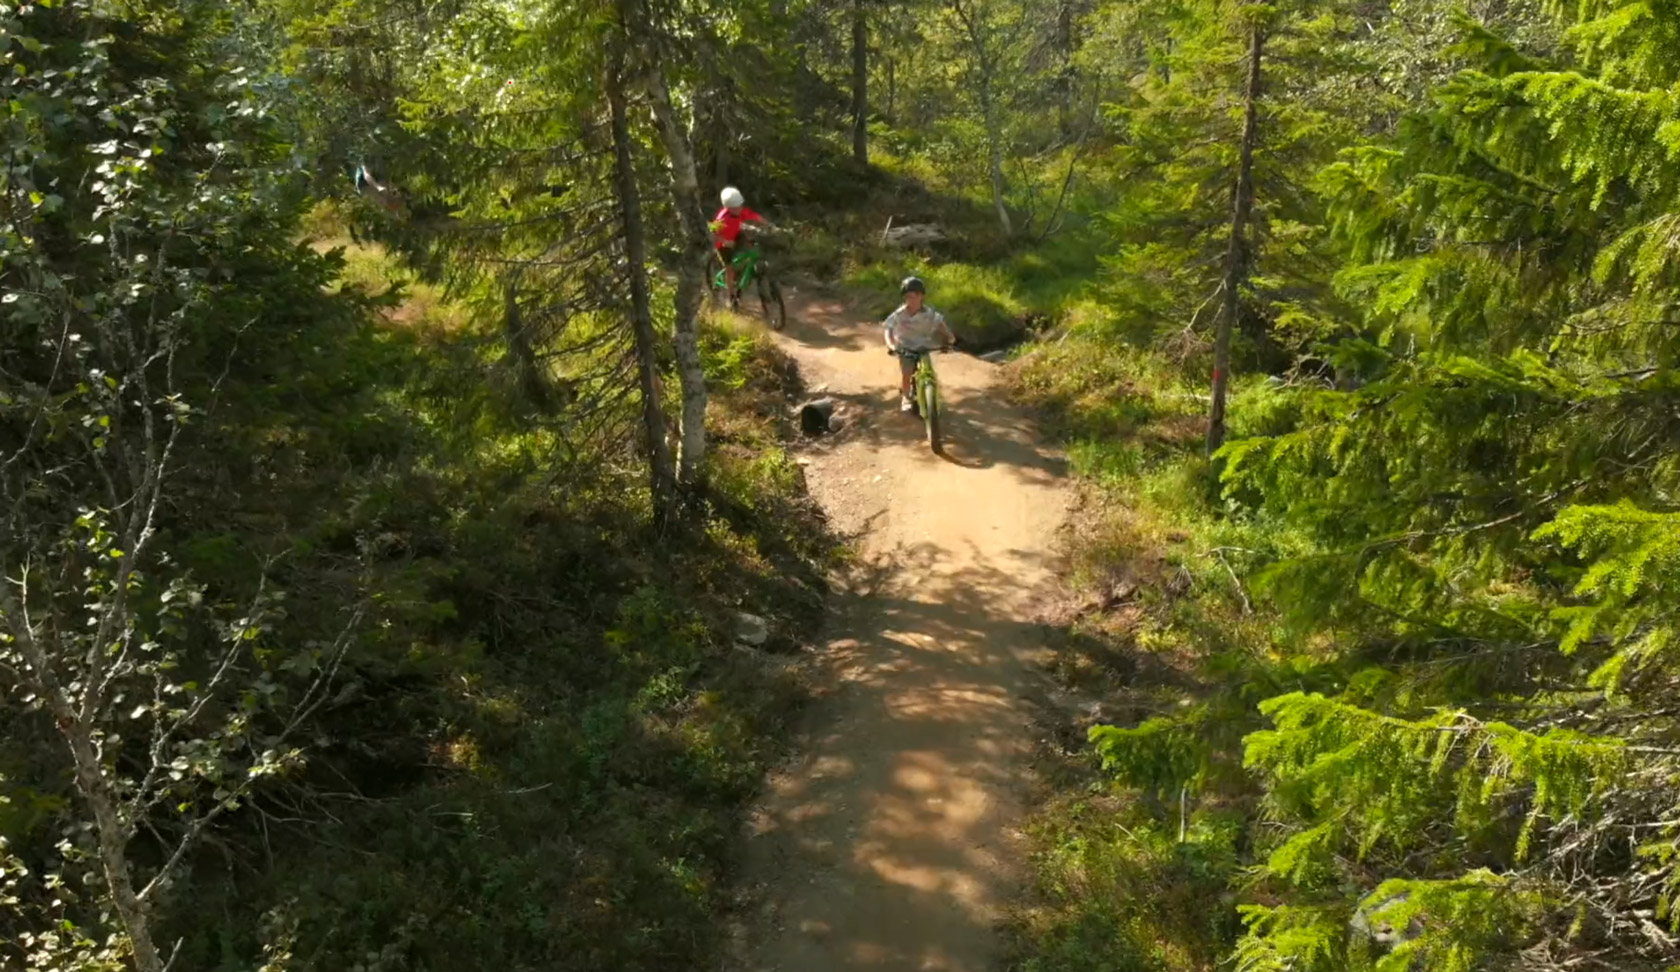 Xc mtb in åre at its best!